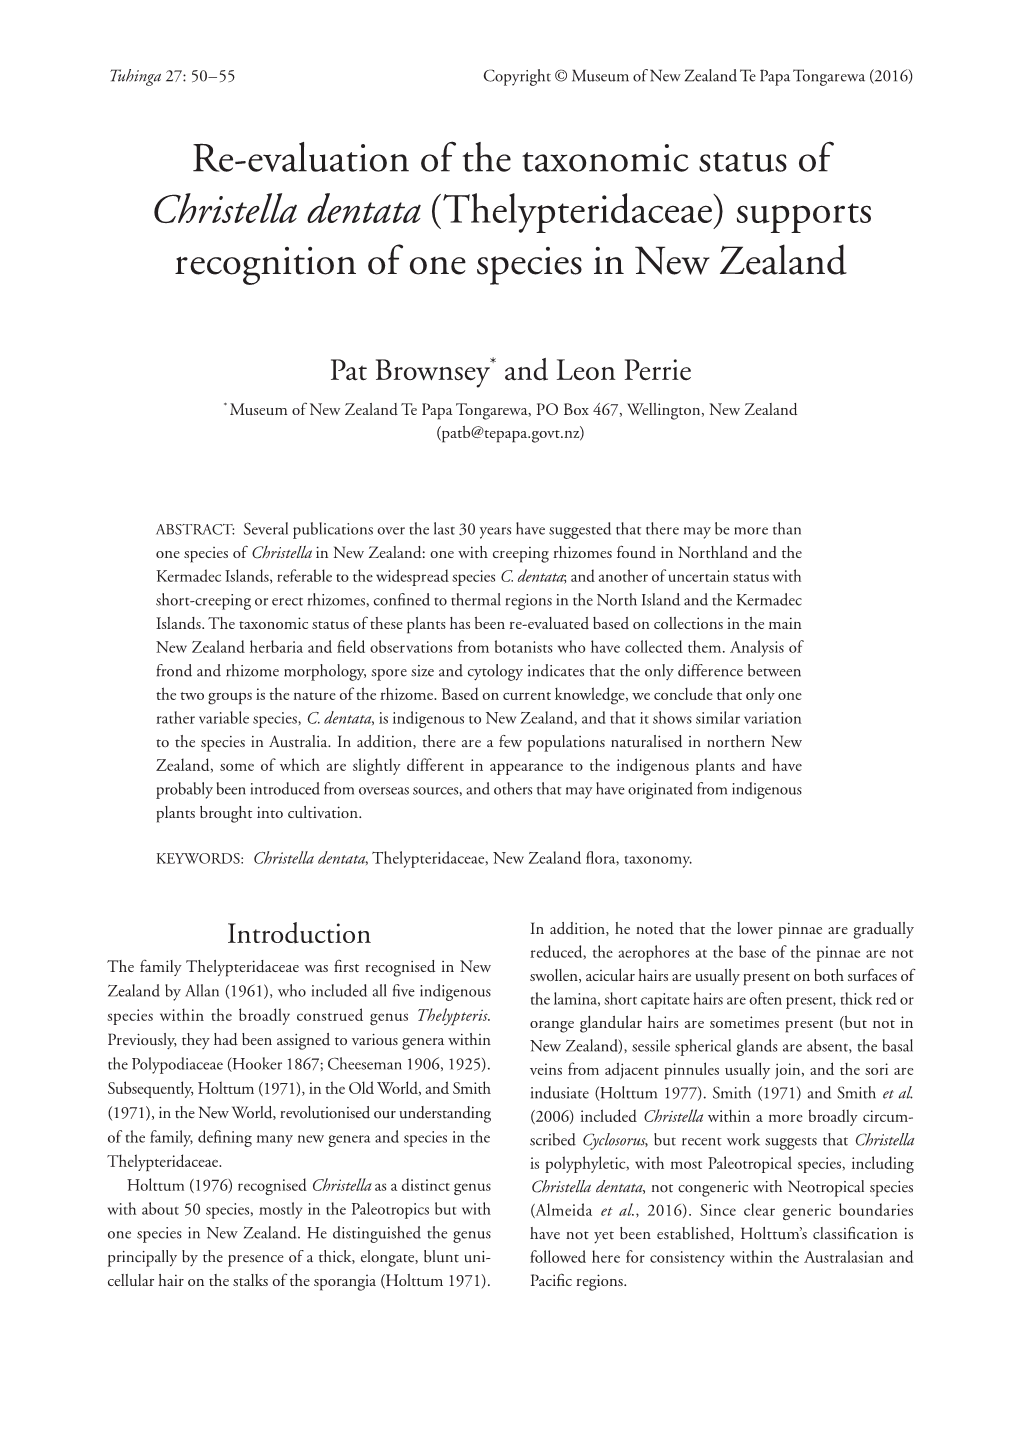 Christella Dentata (Thelypteridaceae) Supports Recognition of One Species in New Zealand